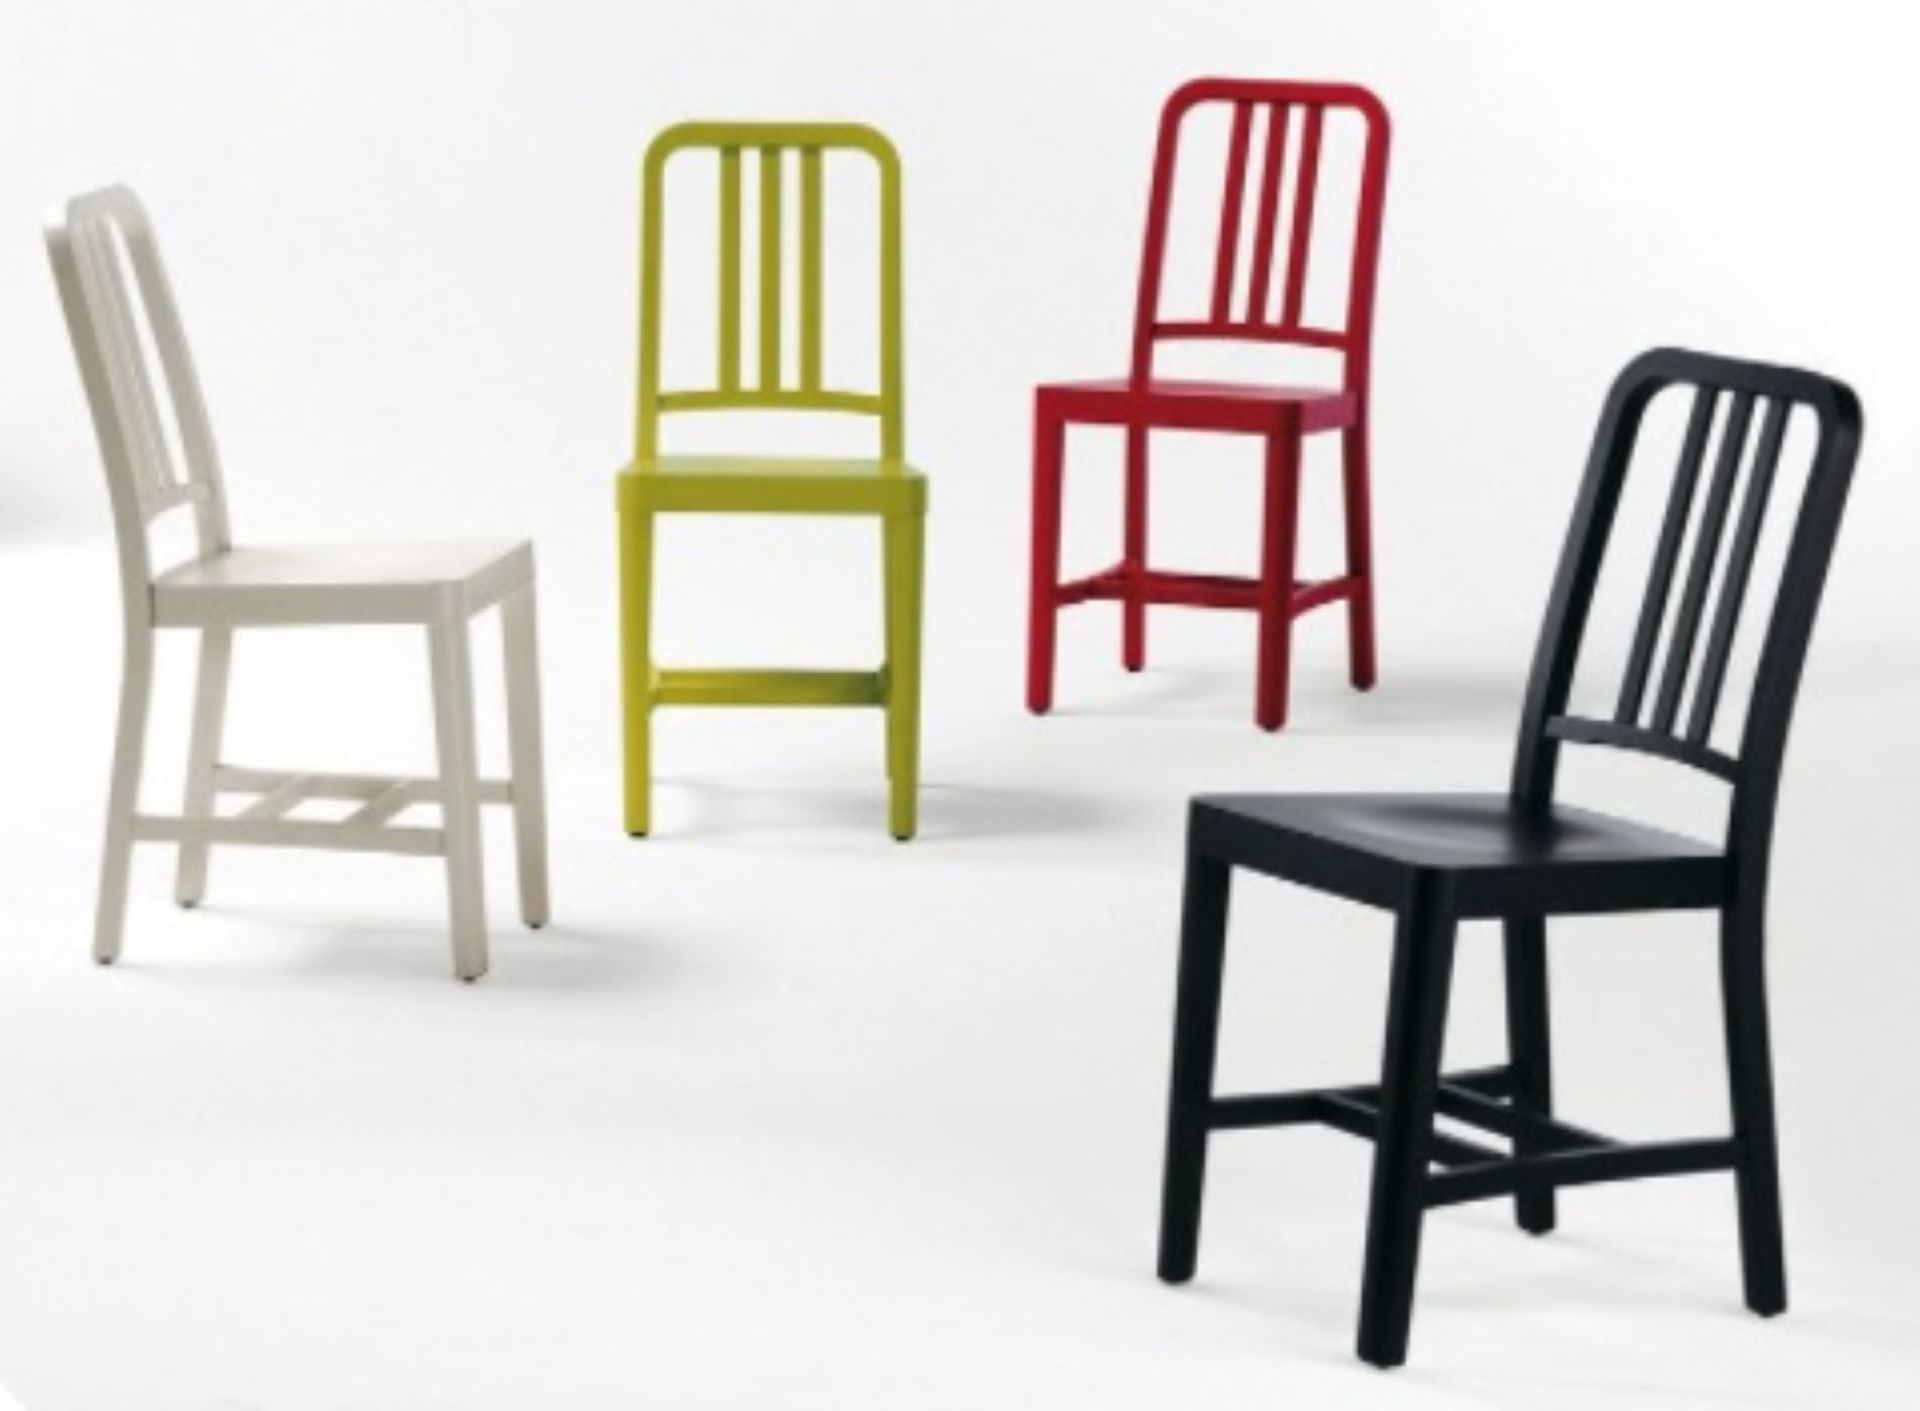 6 x Designer Billiani CO2 Contemporary Wooden Dining Chairs - Designed By Aldo Cibic - Made in Italy - Image 4 of 9